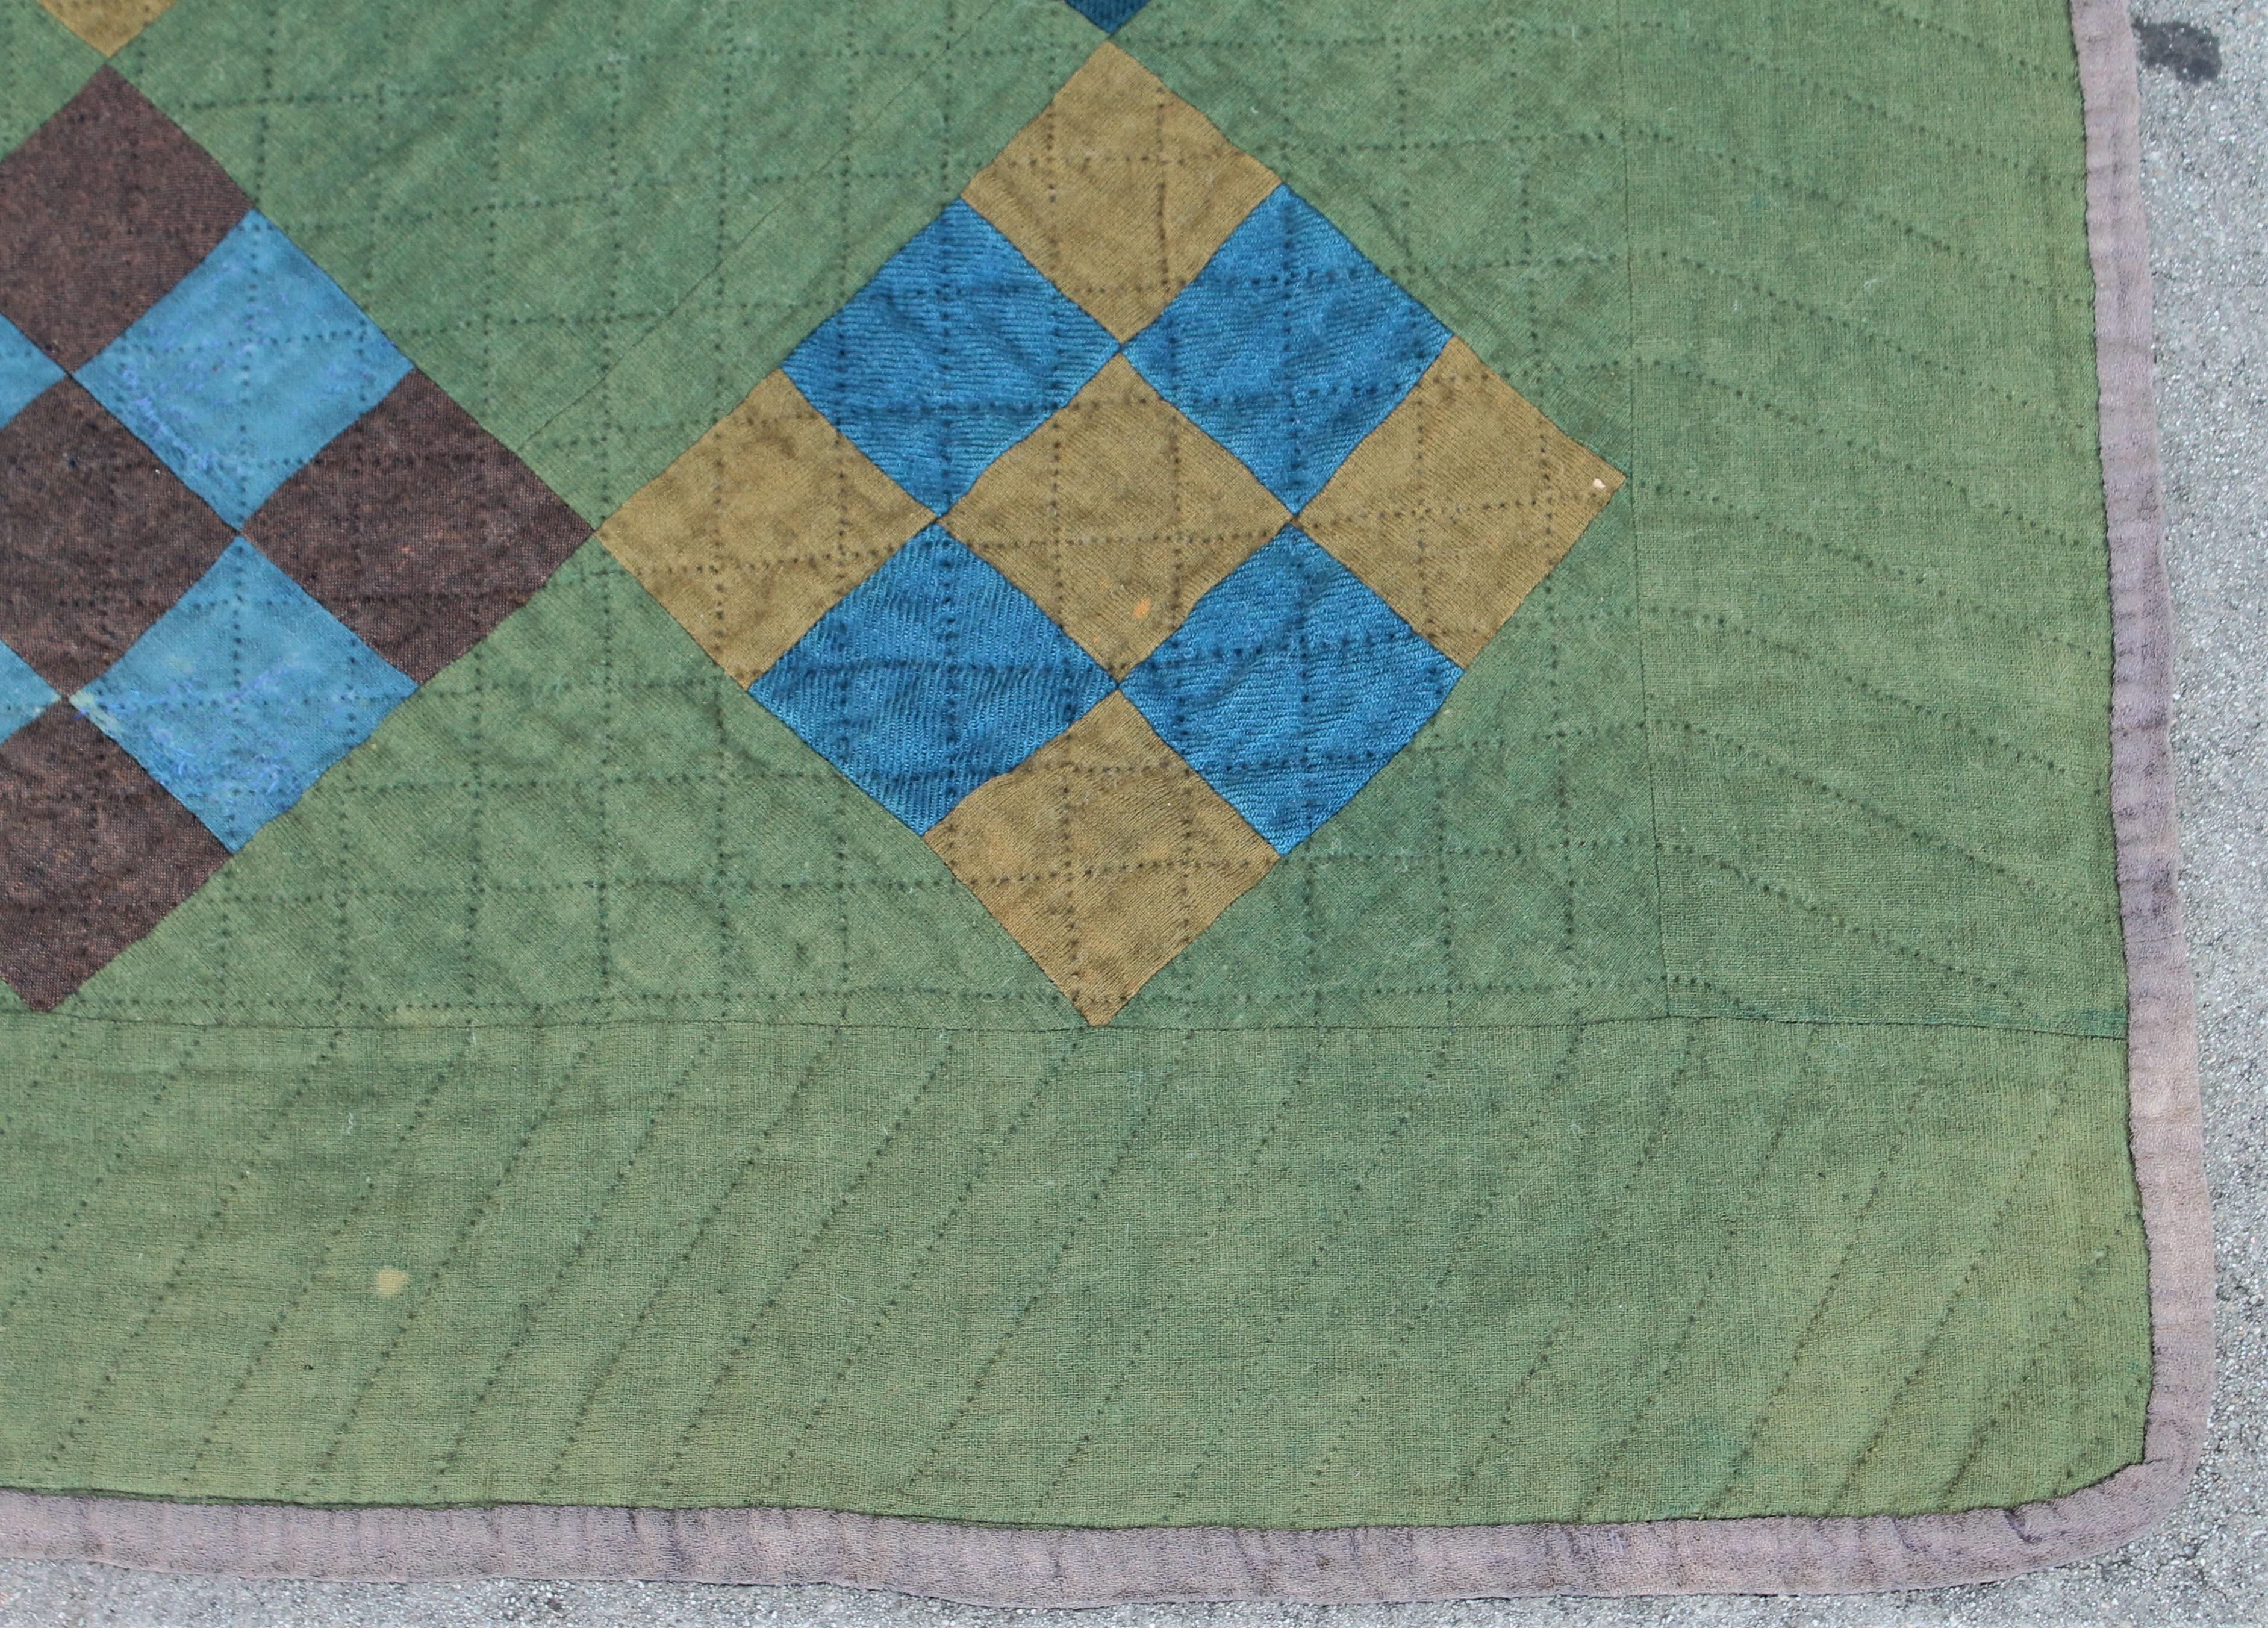 This Lancaster County, Pennsylvania all wool Amish nine patch quilt has minor wear in areas but not a big distraction. The colors are so amazing and rich. The quilt is a large generous size.